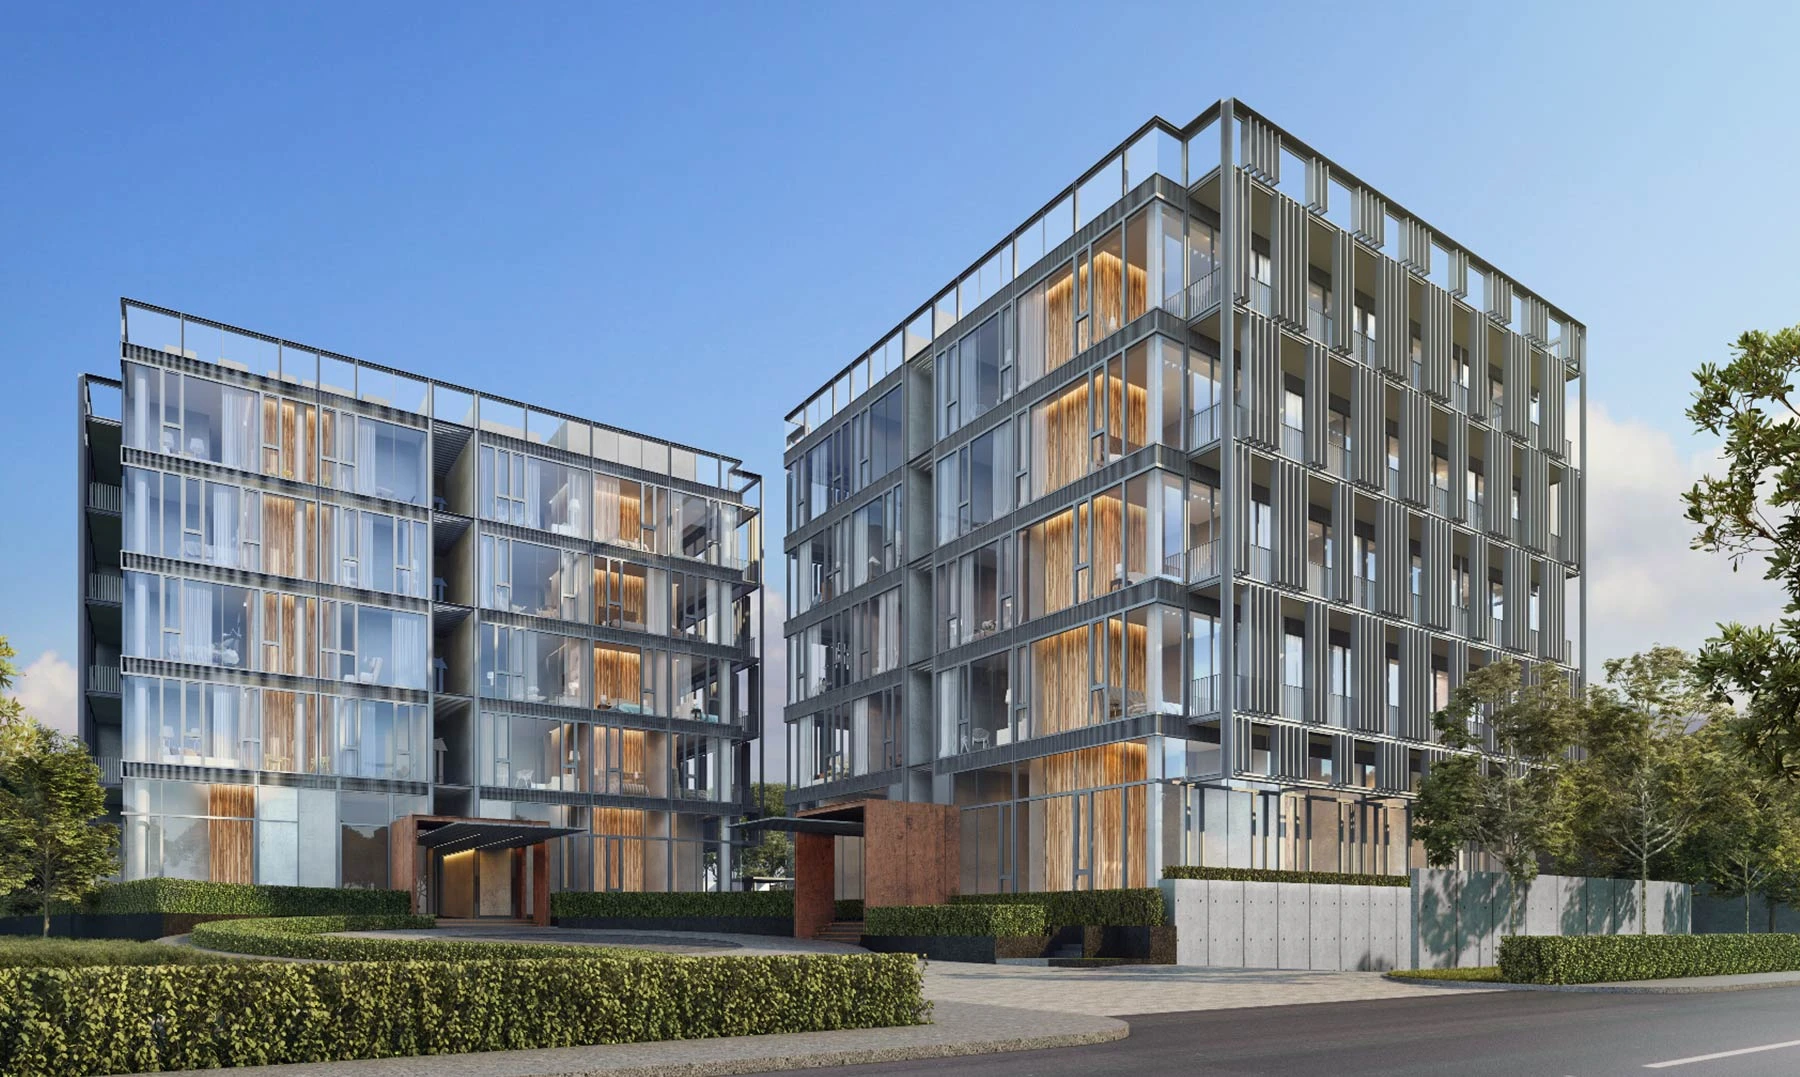 55 unit residential development located at Jervois Road